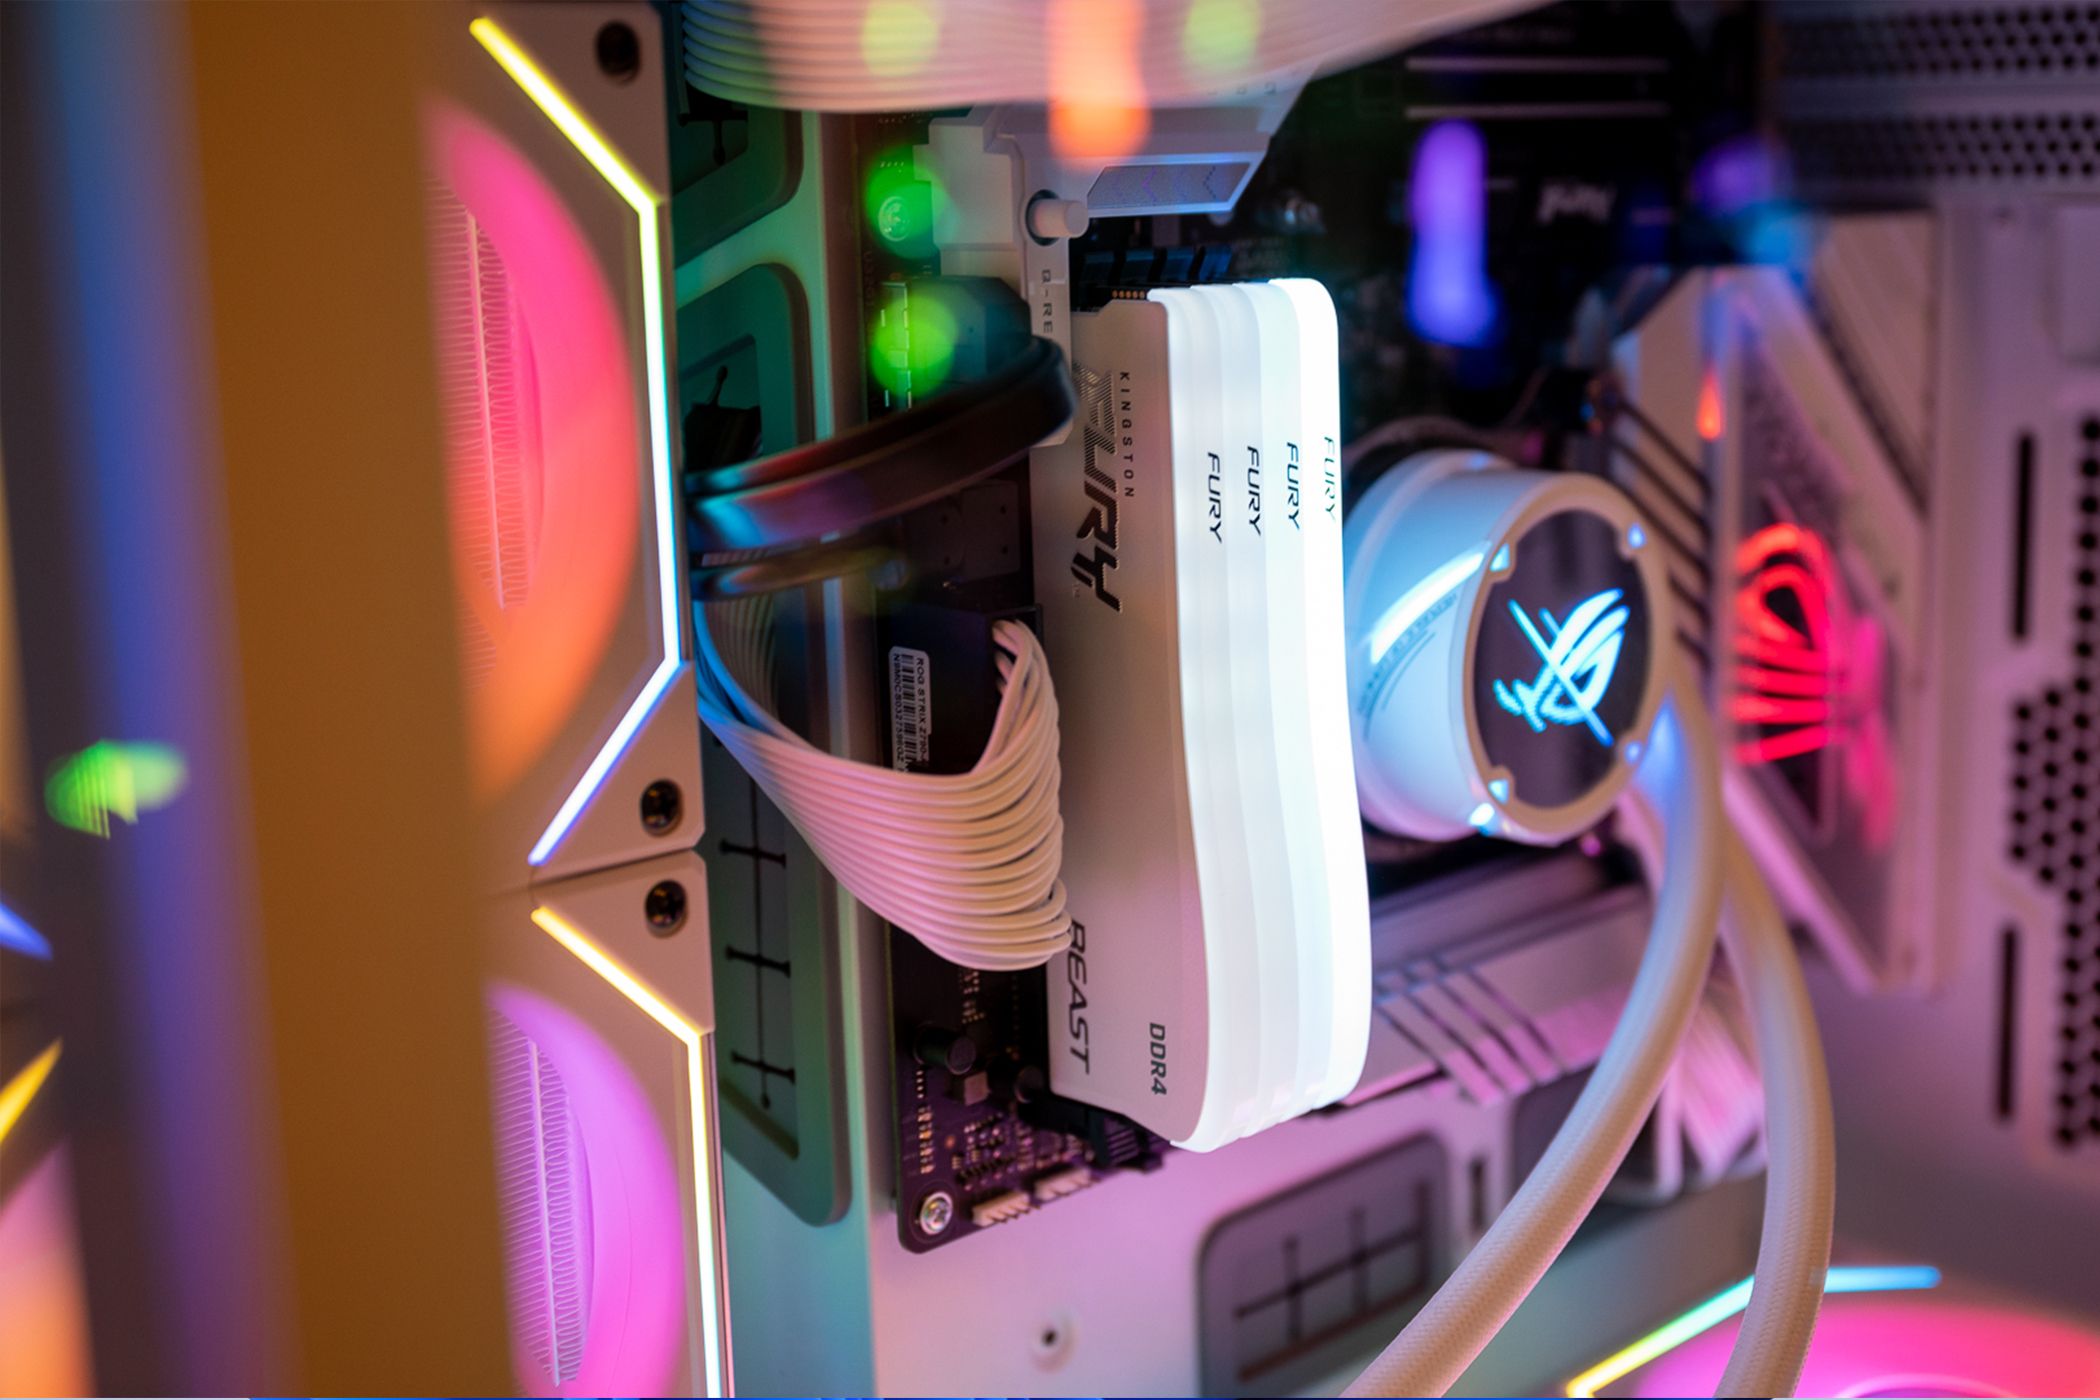 Illuminated RAM in a Colorful Case